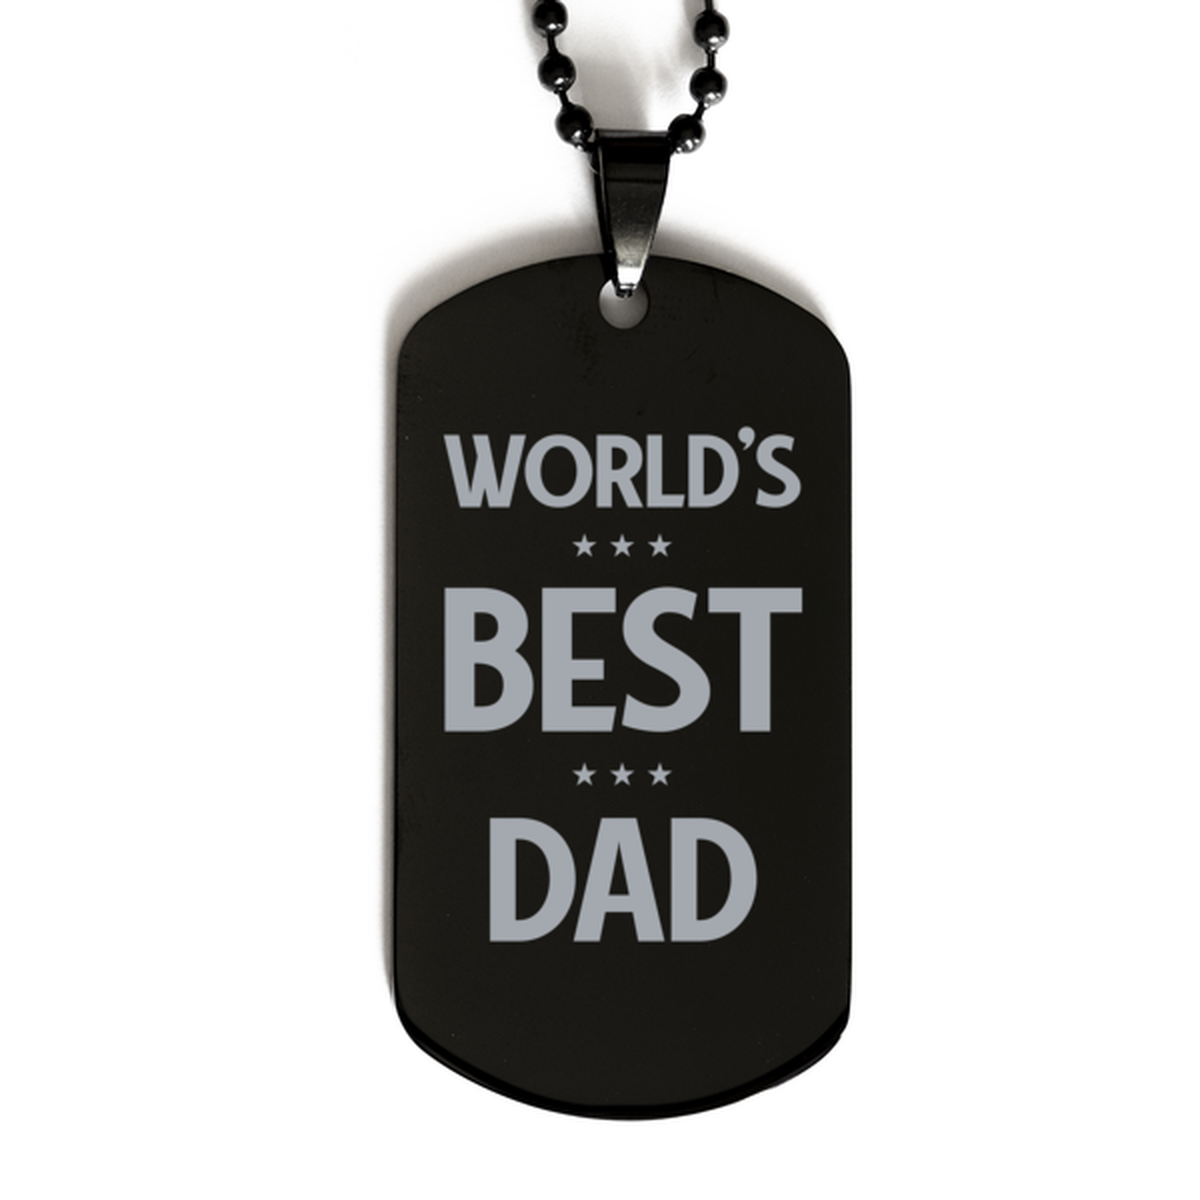 Worlds Best Dad Gifts, Funny Black Engraved Dog Tag For Dad, Birthday Presents For Men